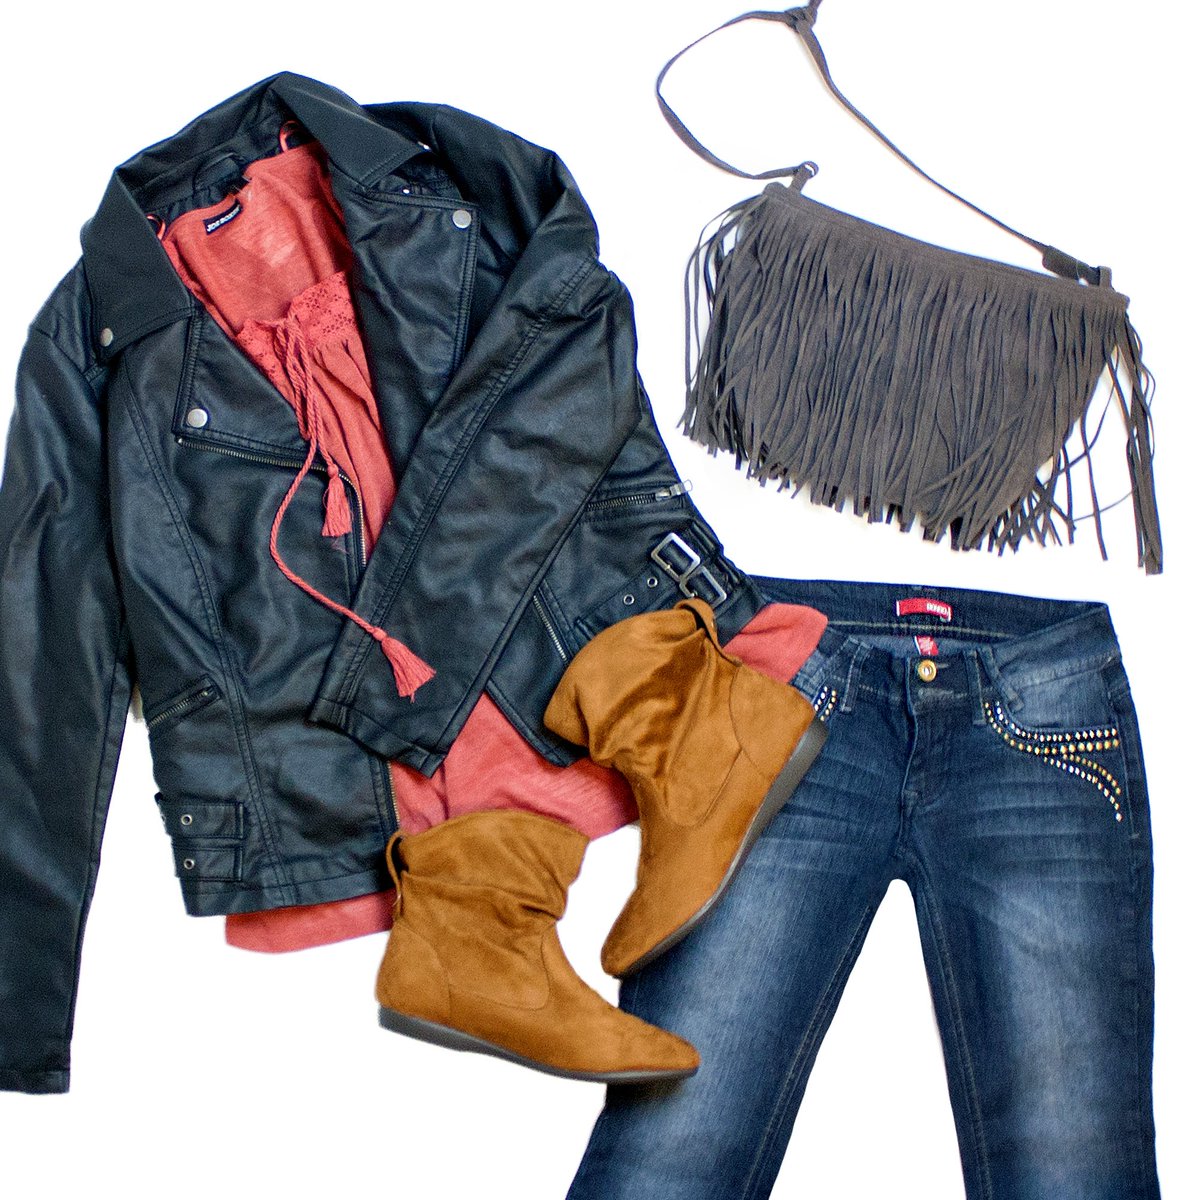 The far out trends of the #70s are back. Visit our blog to learn how to wear them! goo.gl/AJ3ipx